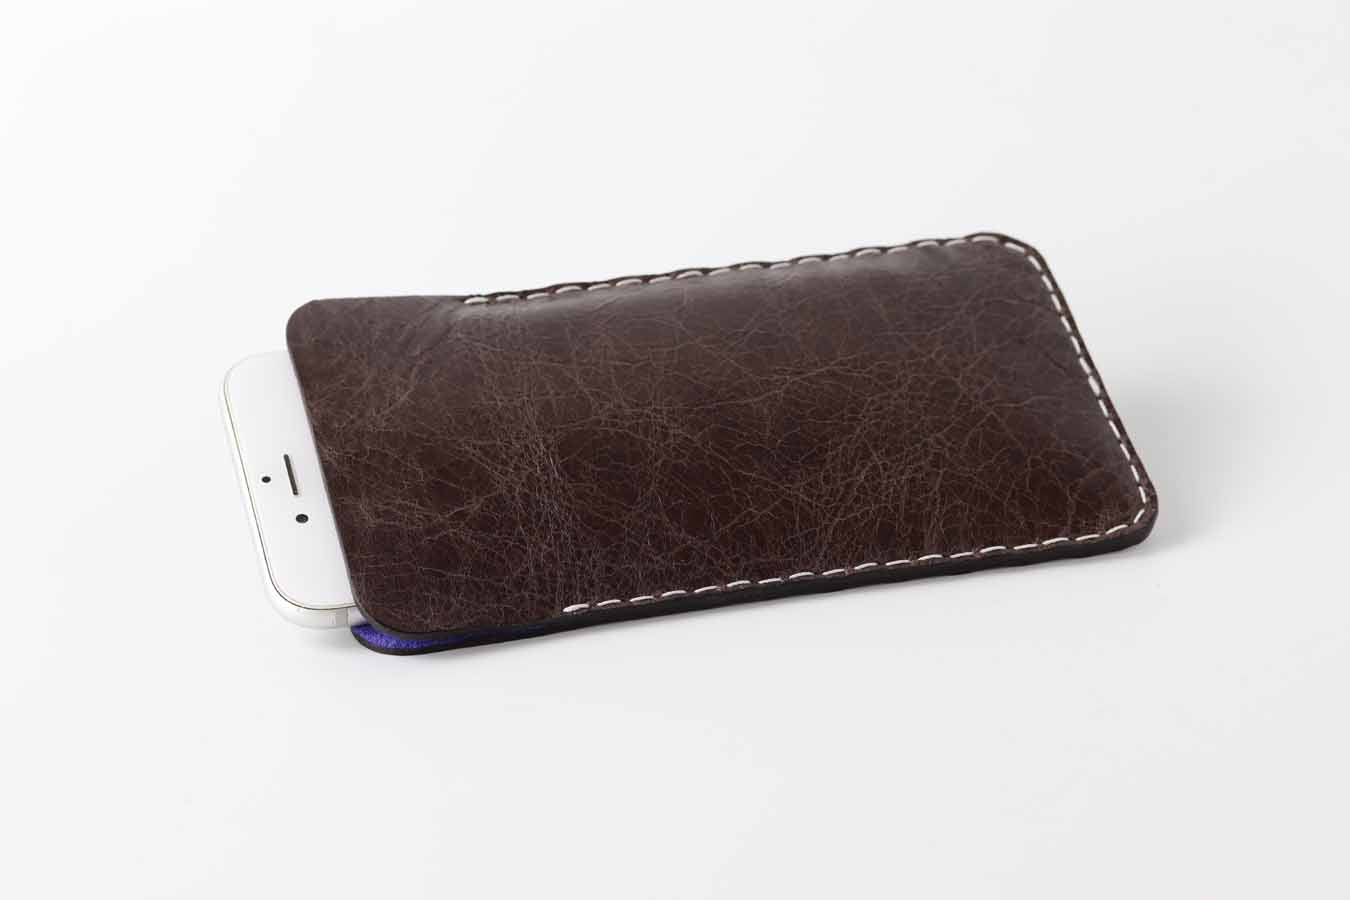 Stylish iPhone 14 13 leather black sleeve with suede lining for phone protection